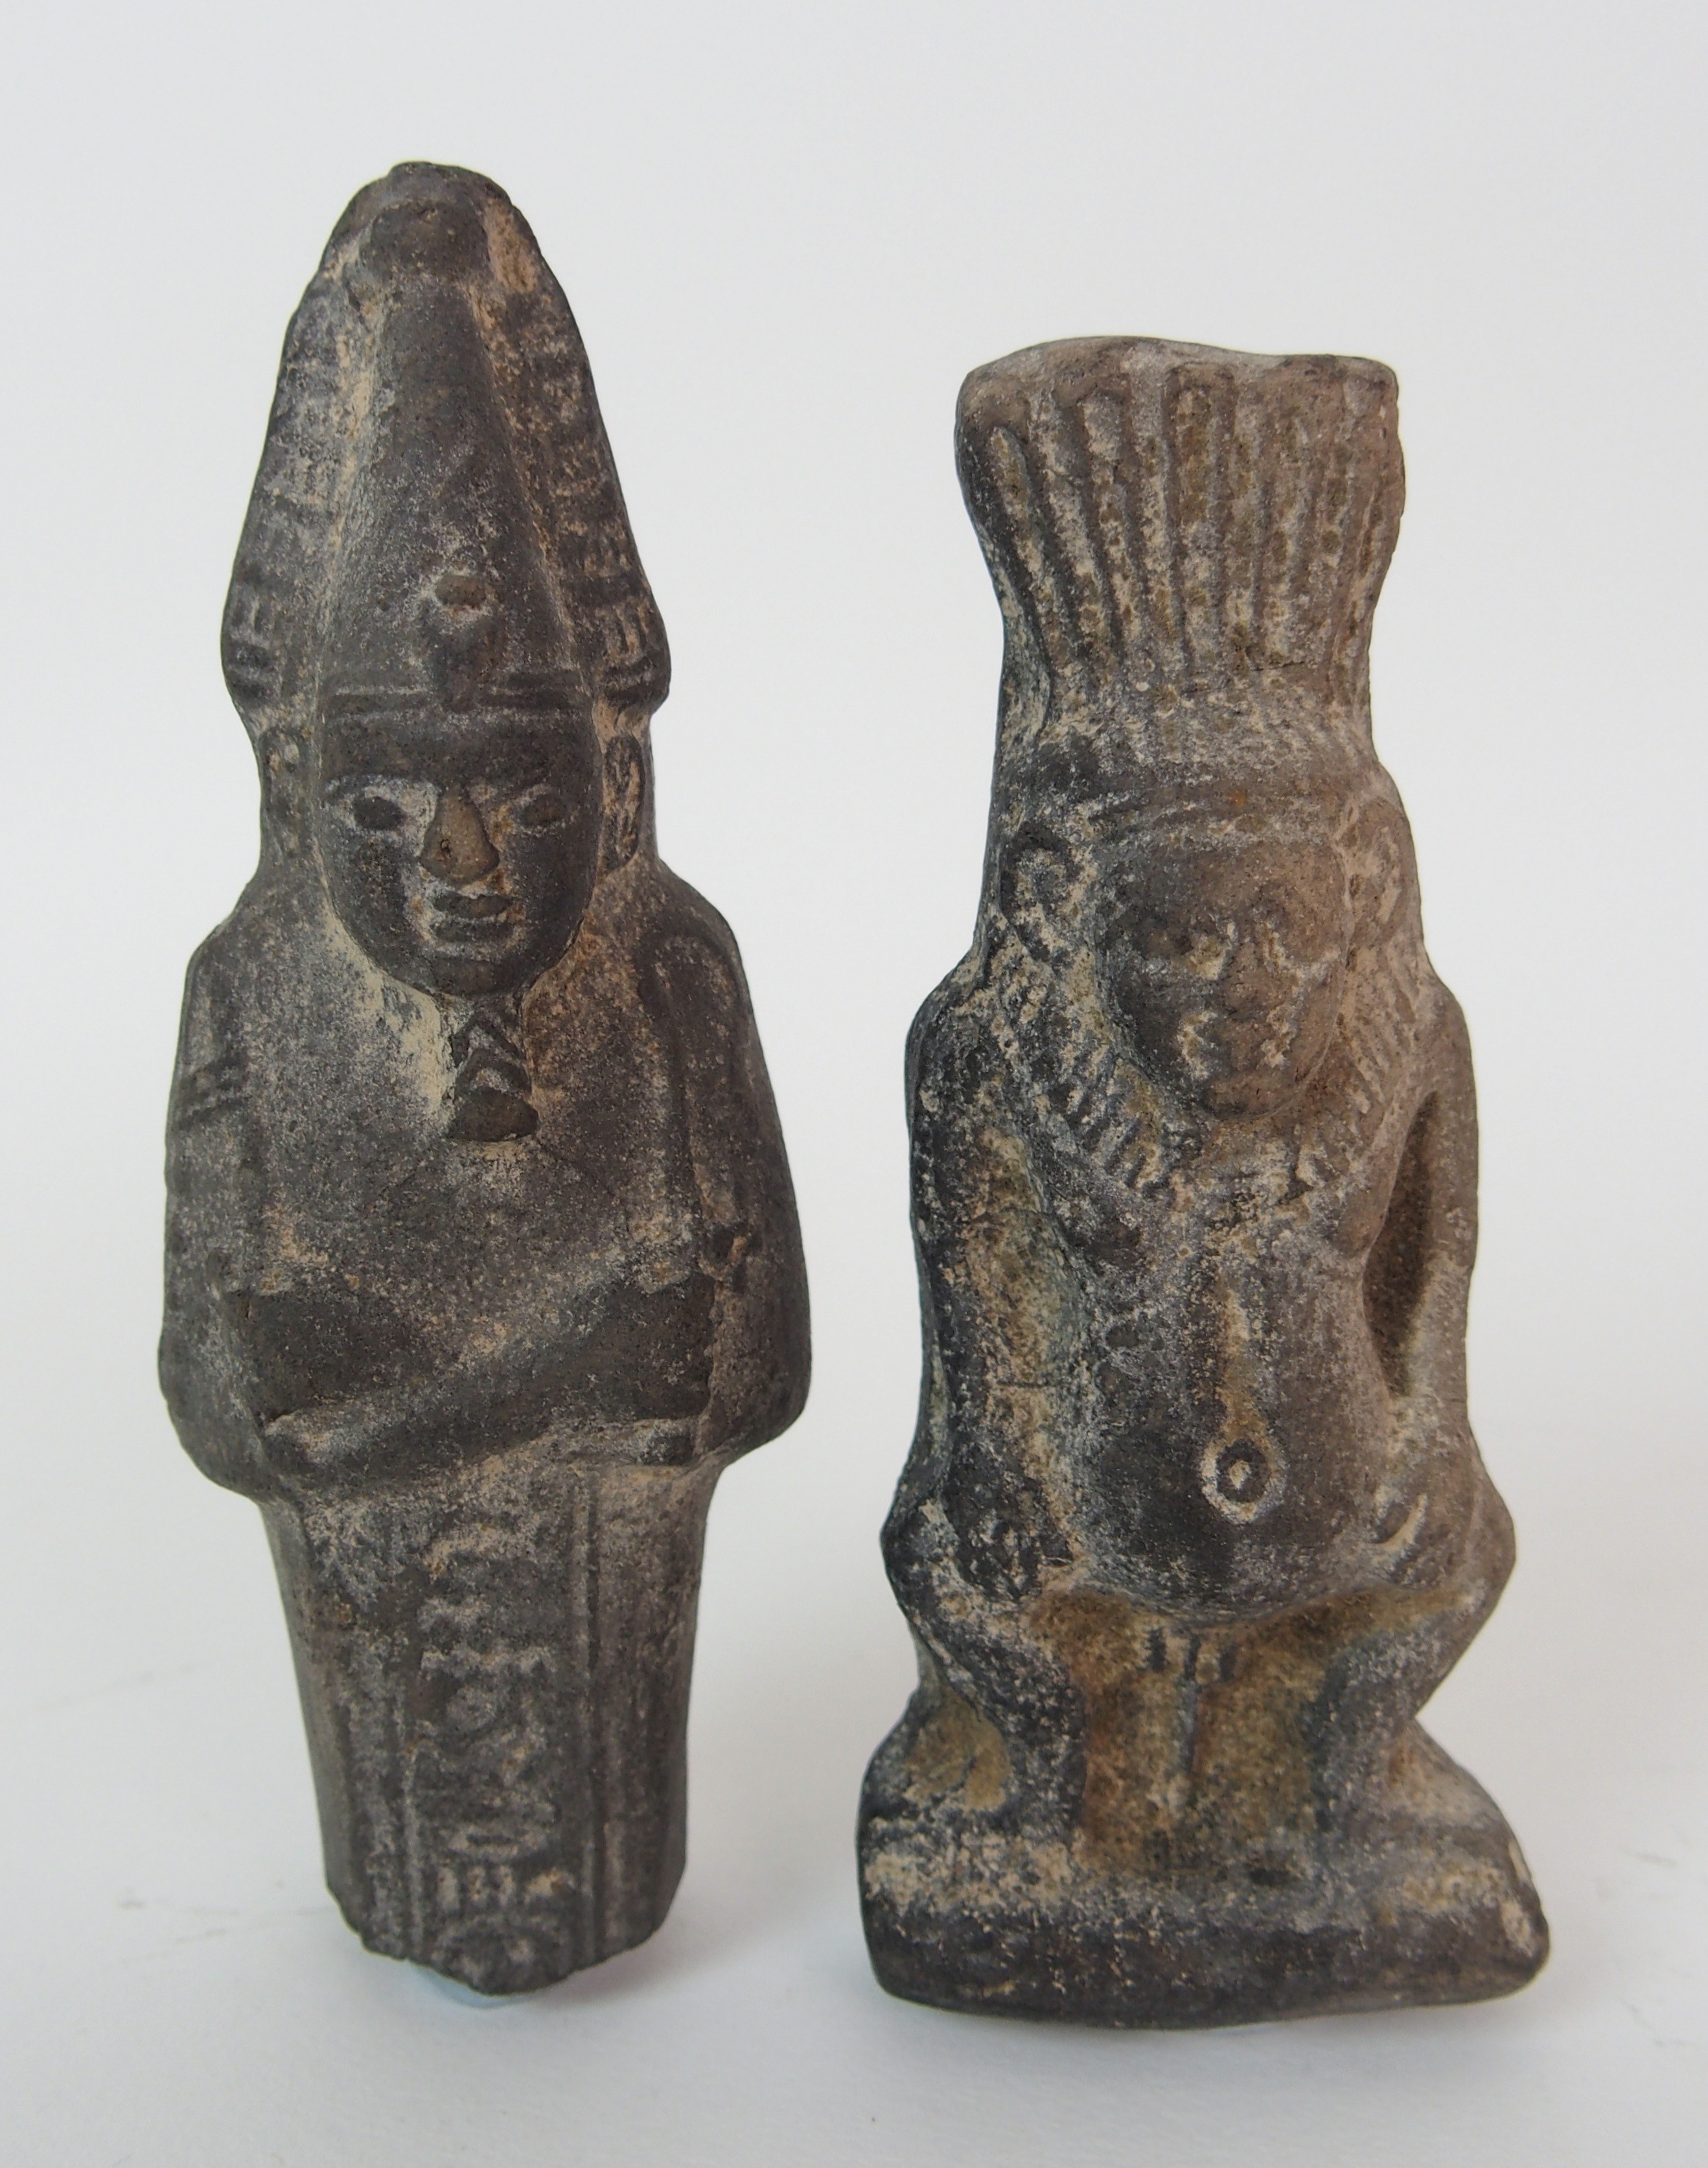 An Egyptian carved stone statue of a Jackal-headed god 9cm high, carving of a fat bellied idol, 9. - Image 6 of 10